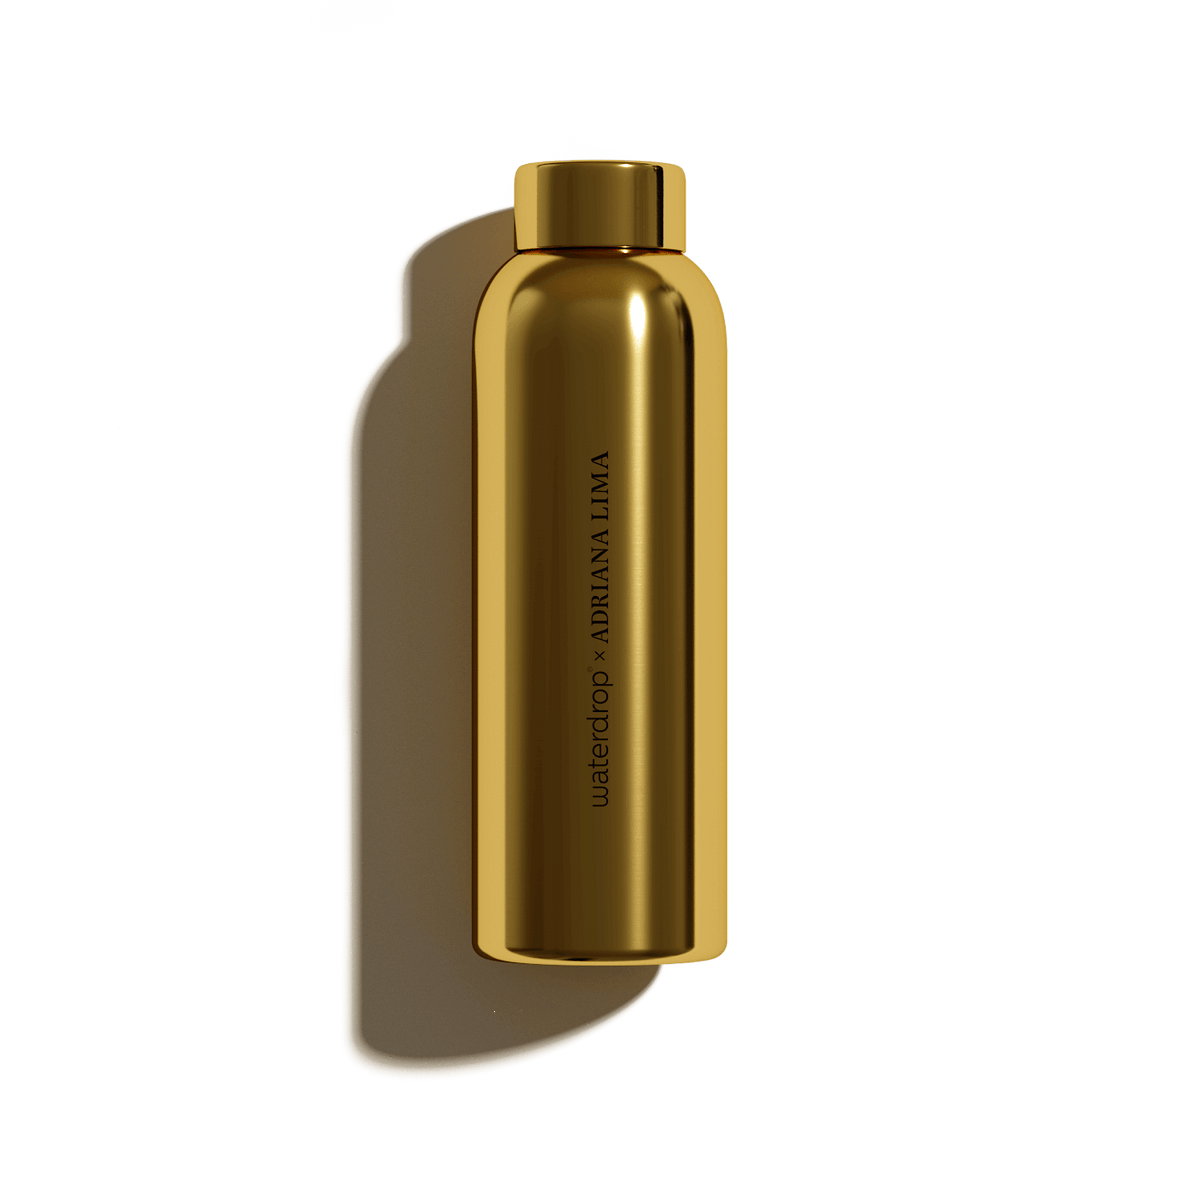 https://cdn.shopify.com/s/files/1/0274/4988/4706/products/waterdrop-oro-limited-steel-bottle-600ml-adriana-lima_1200x.png?v=1650815860